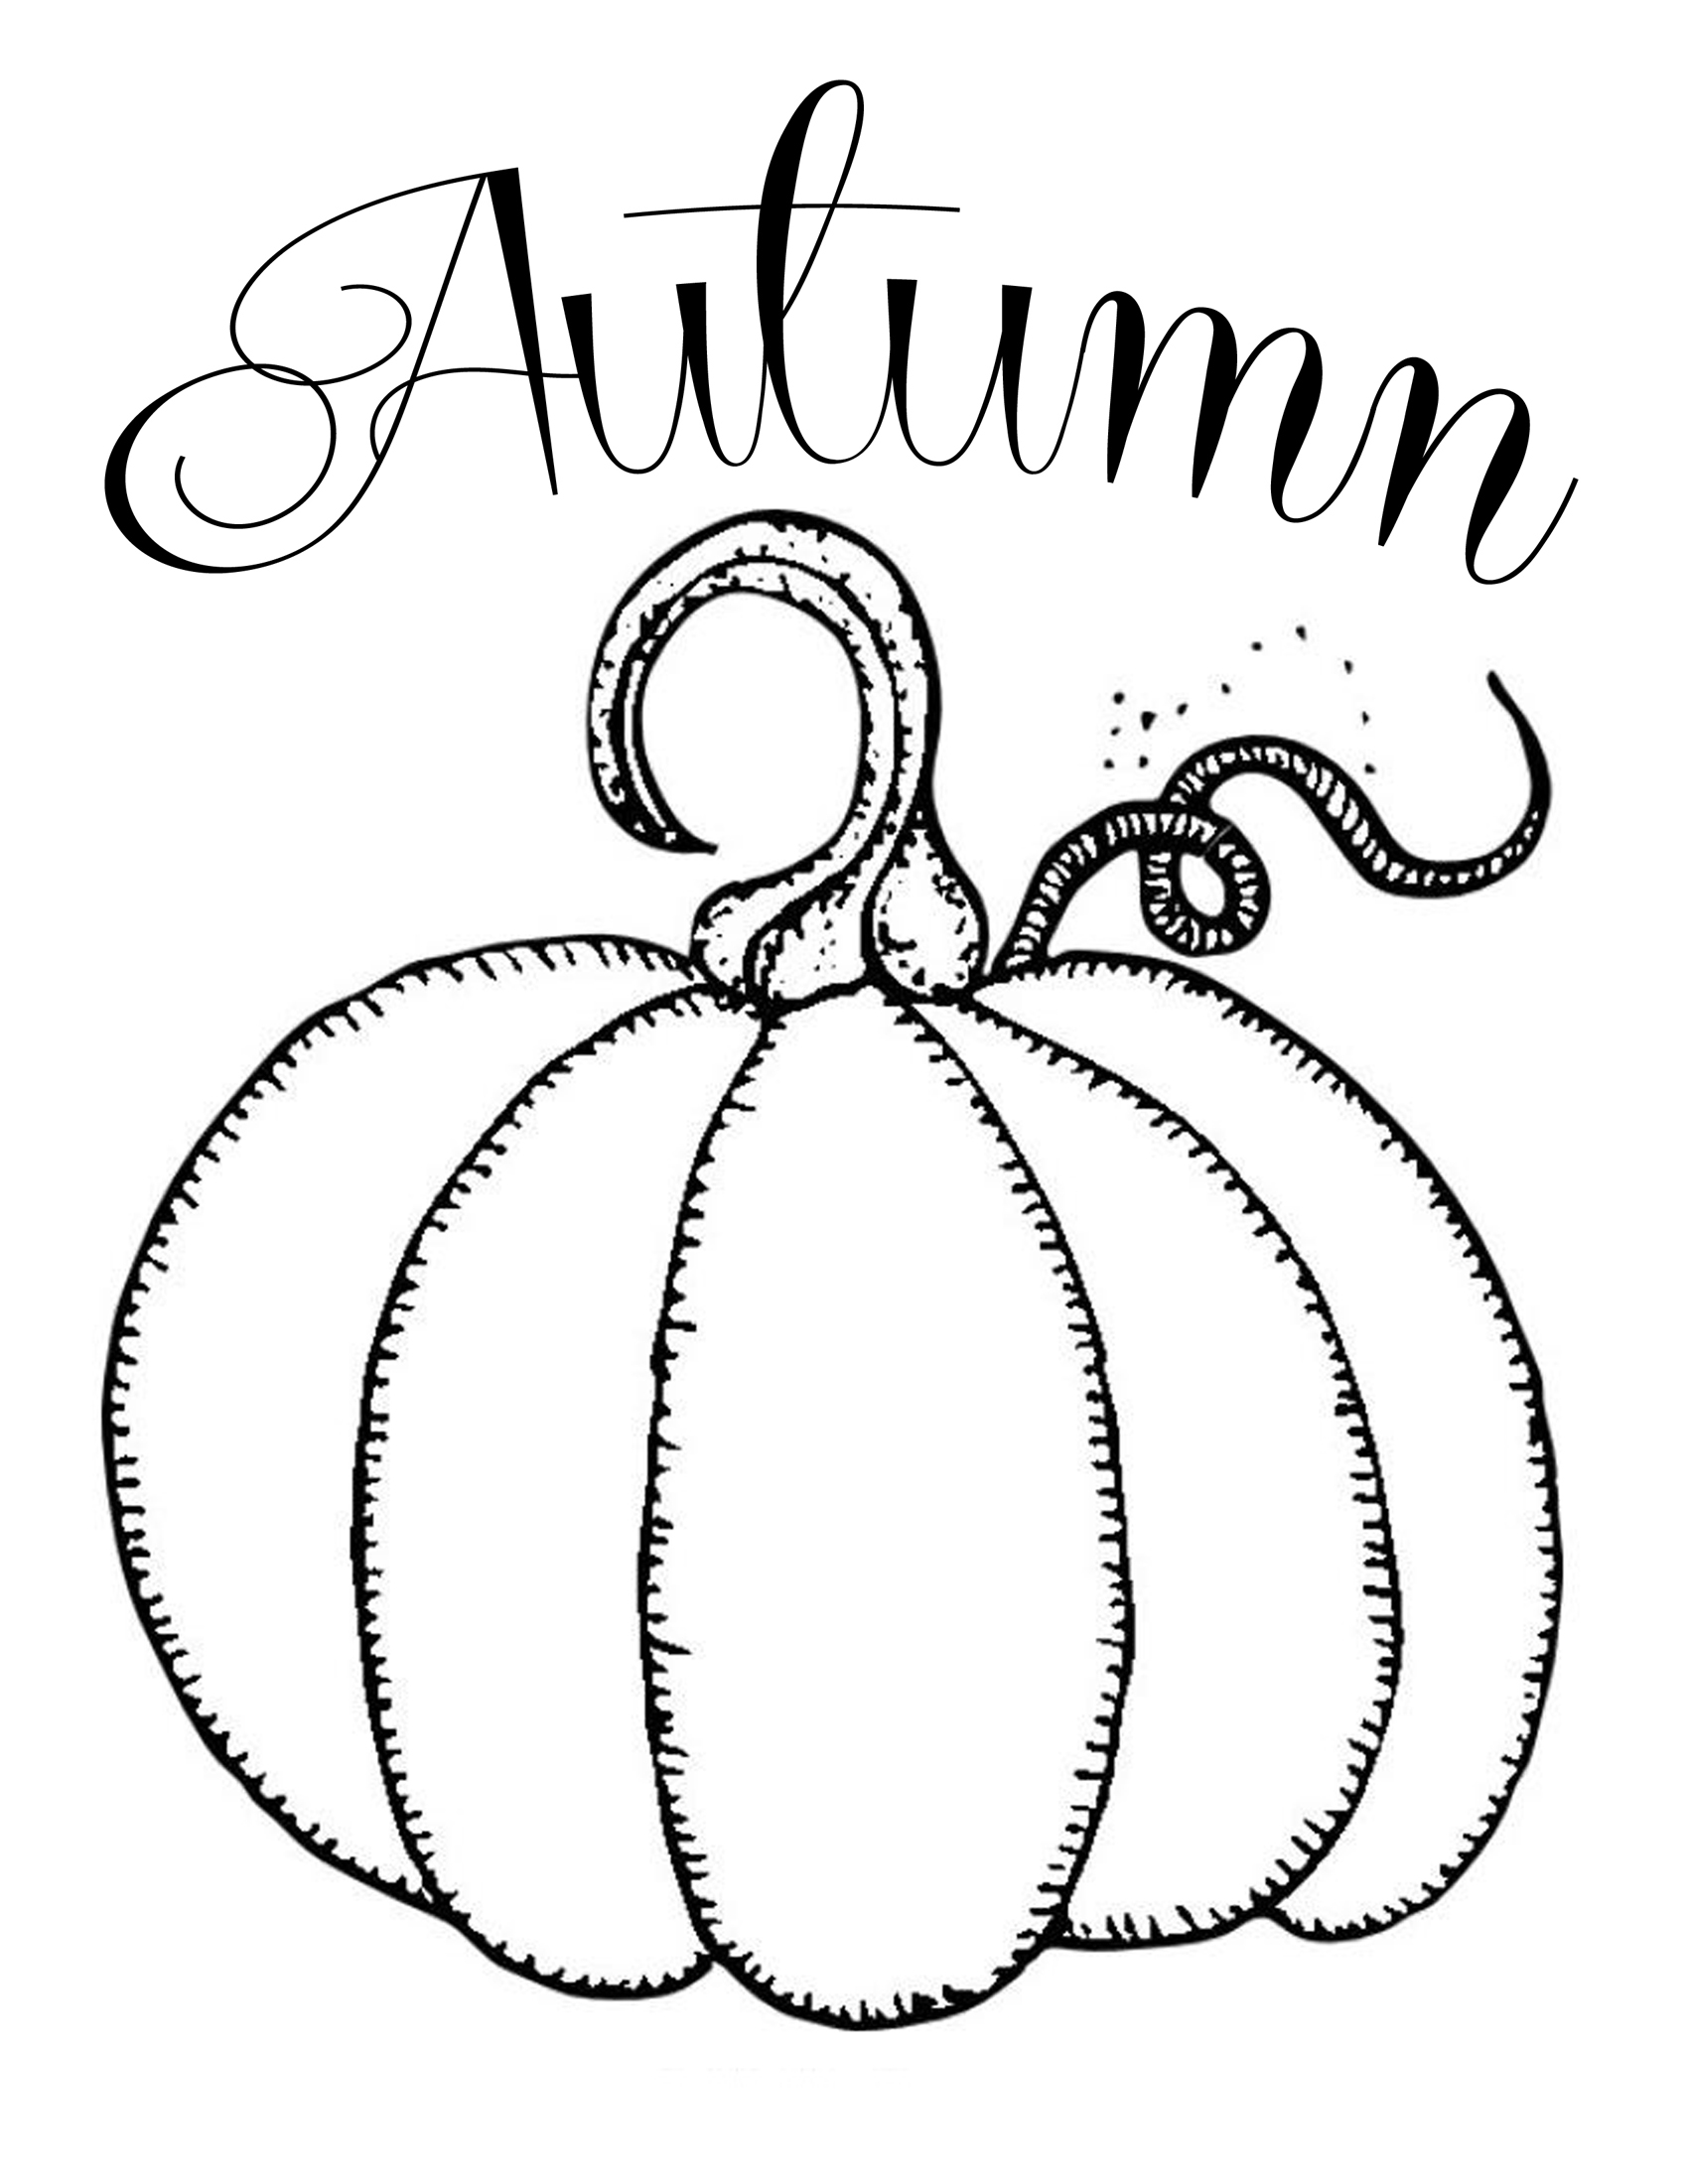 free-printable-pumpkin-coloring-pages-printable-free-templates-download